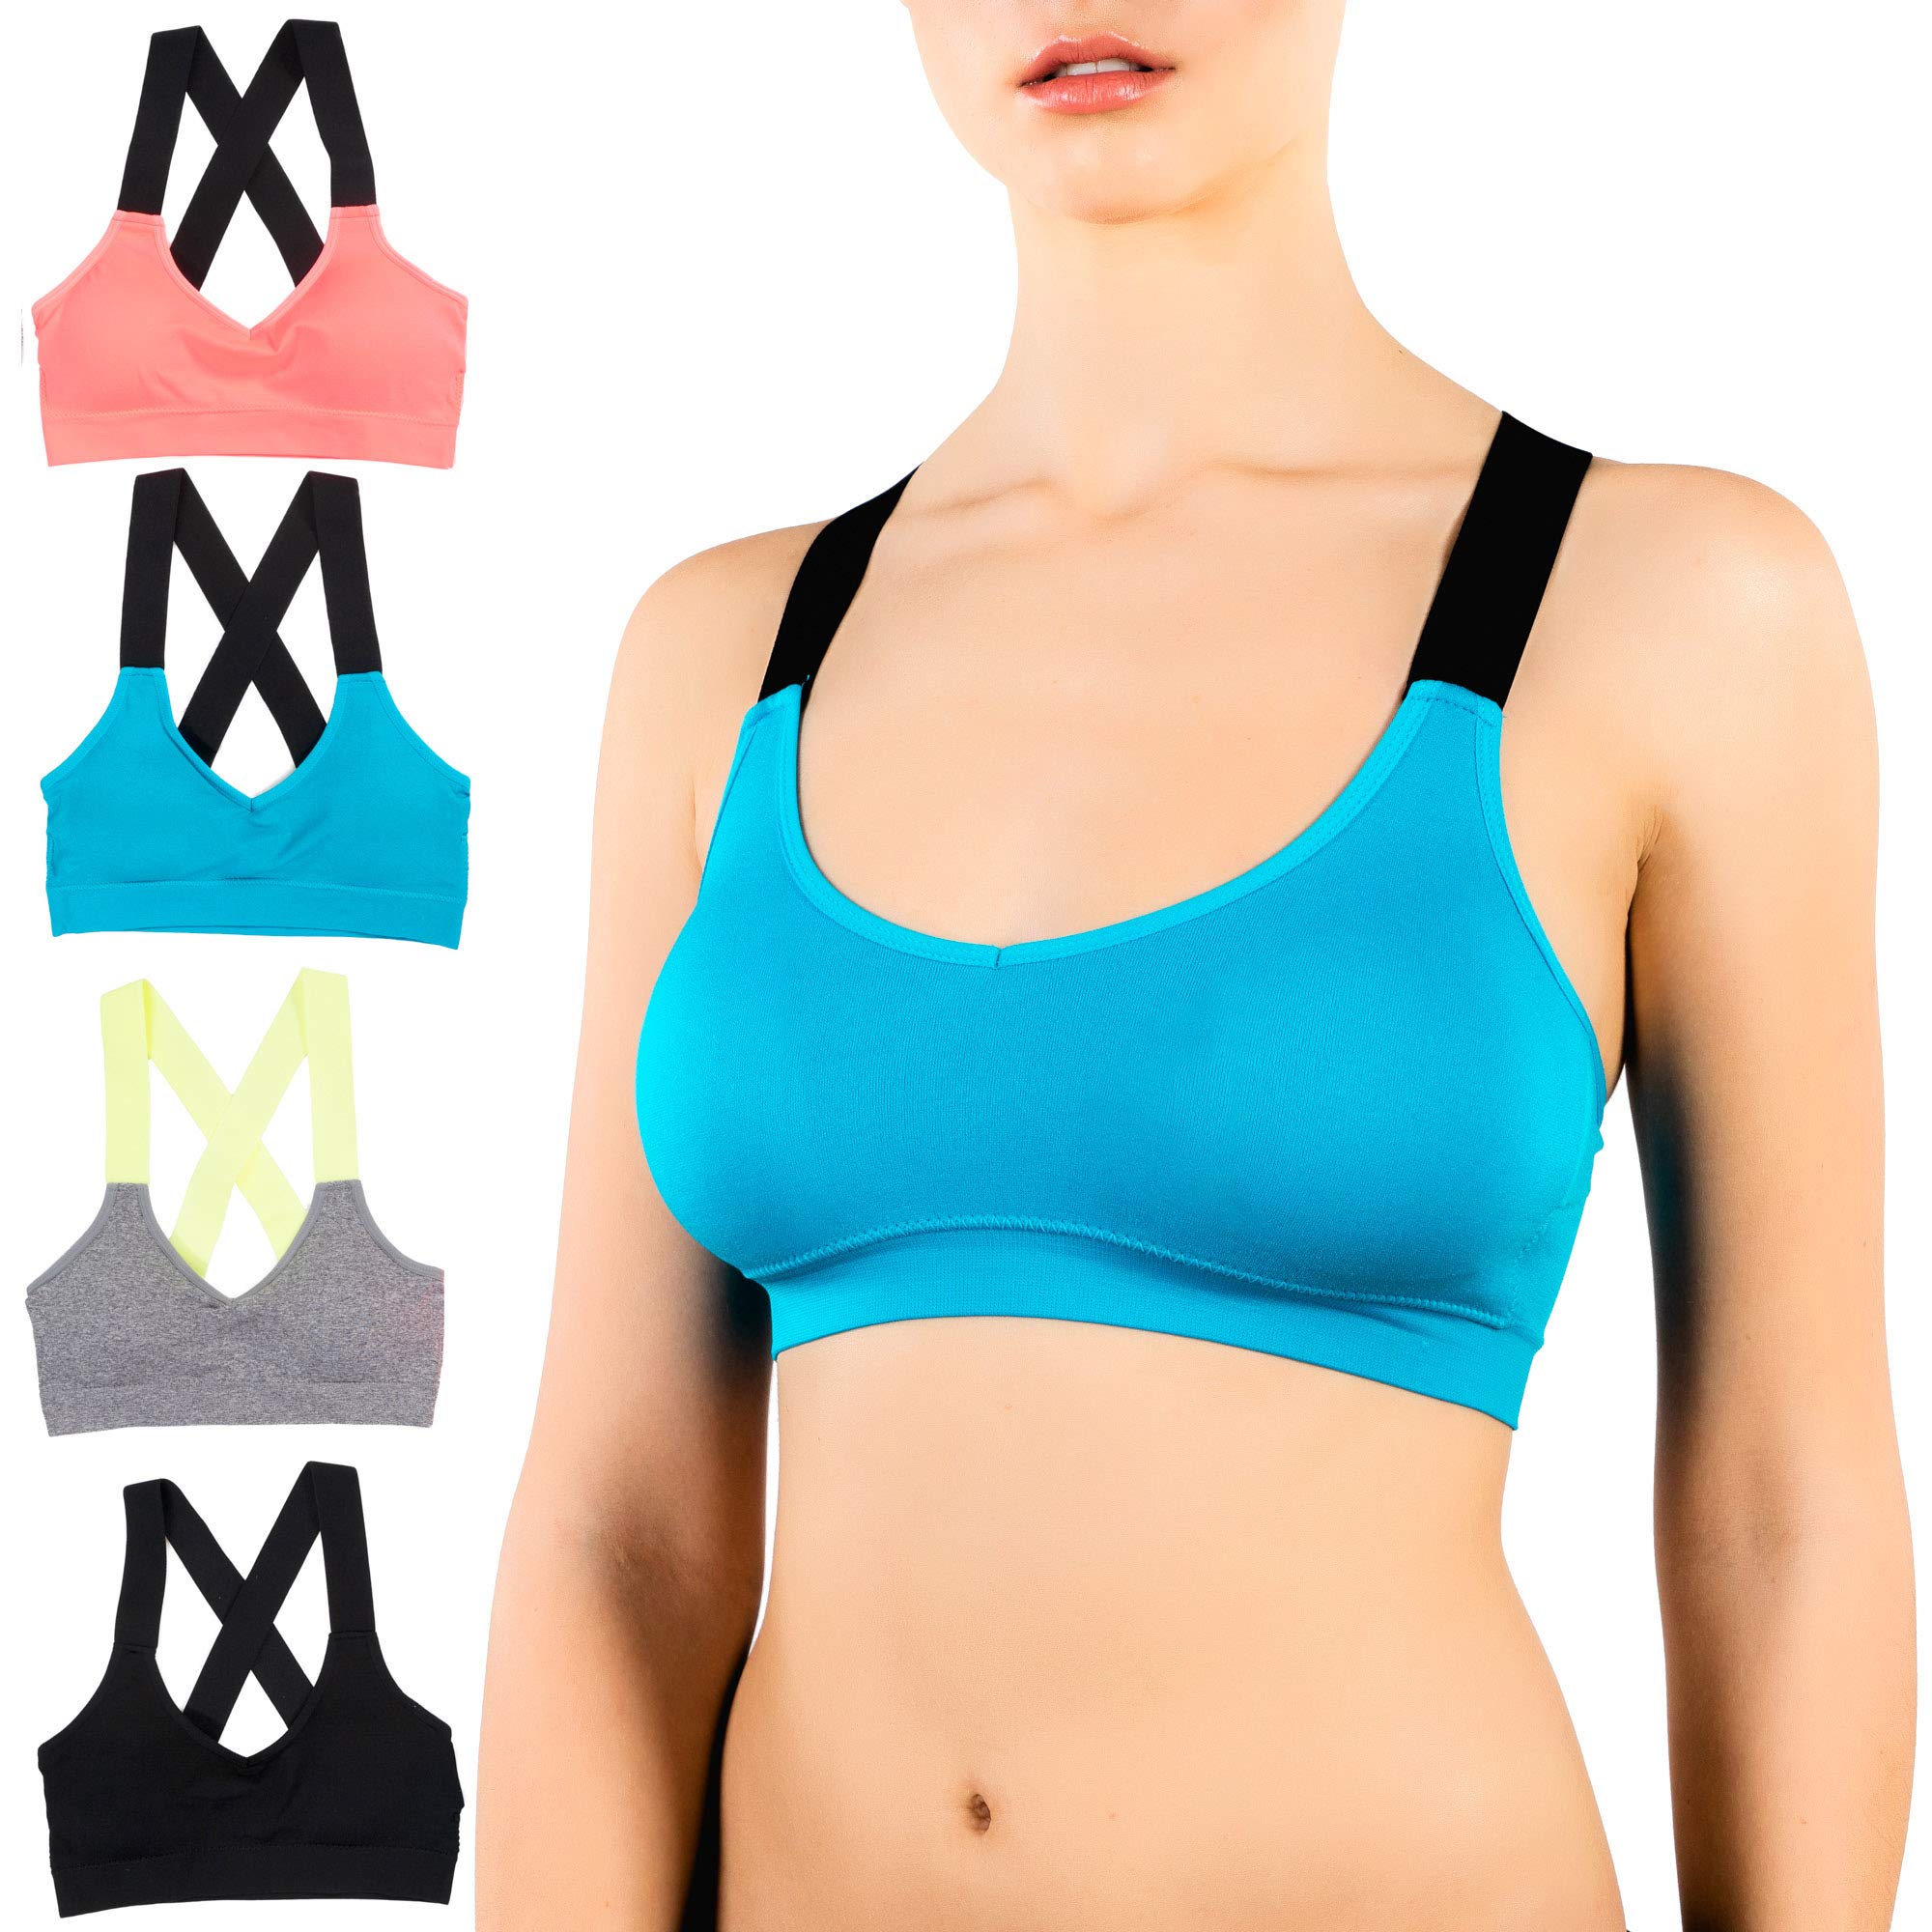 Alyce Ives Intimates Womens Sports Bra, Pack of 4